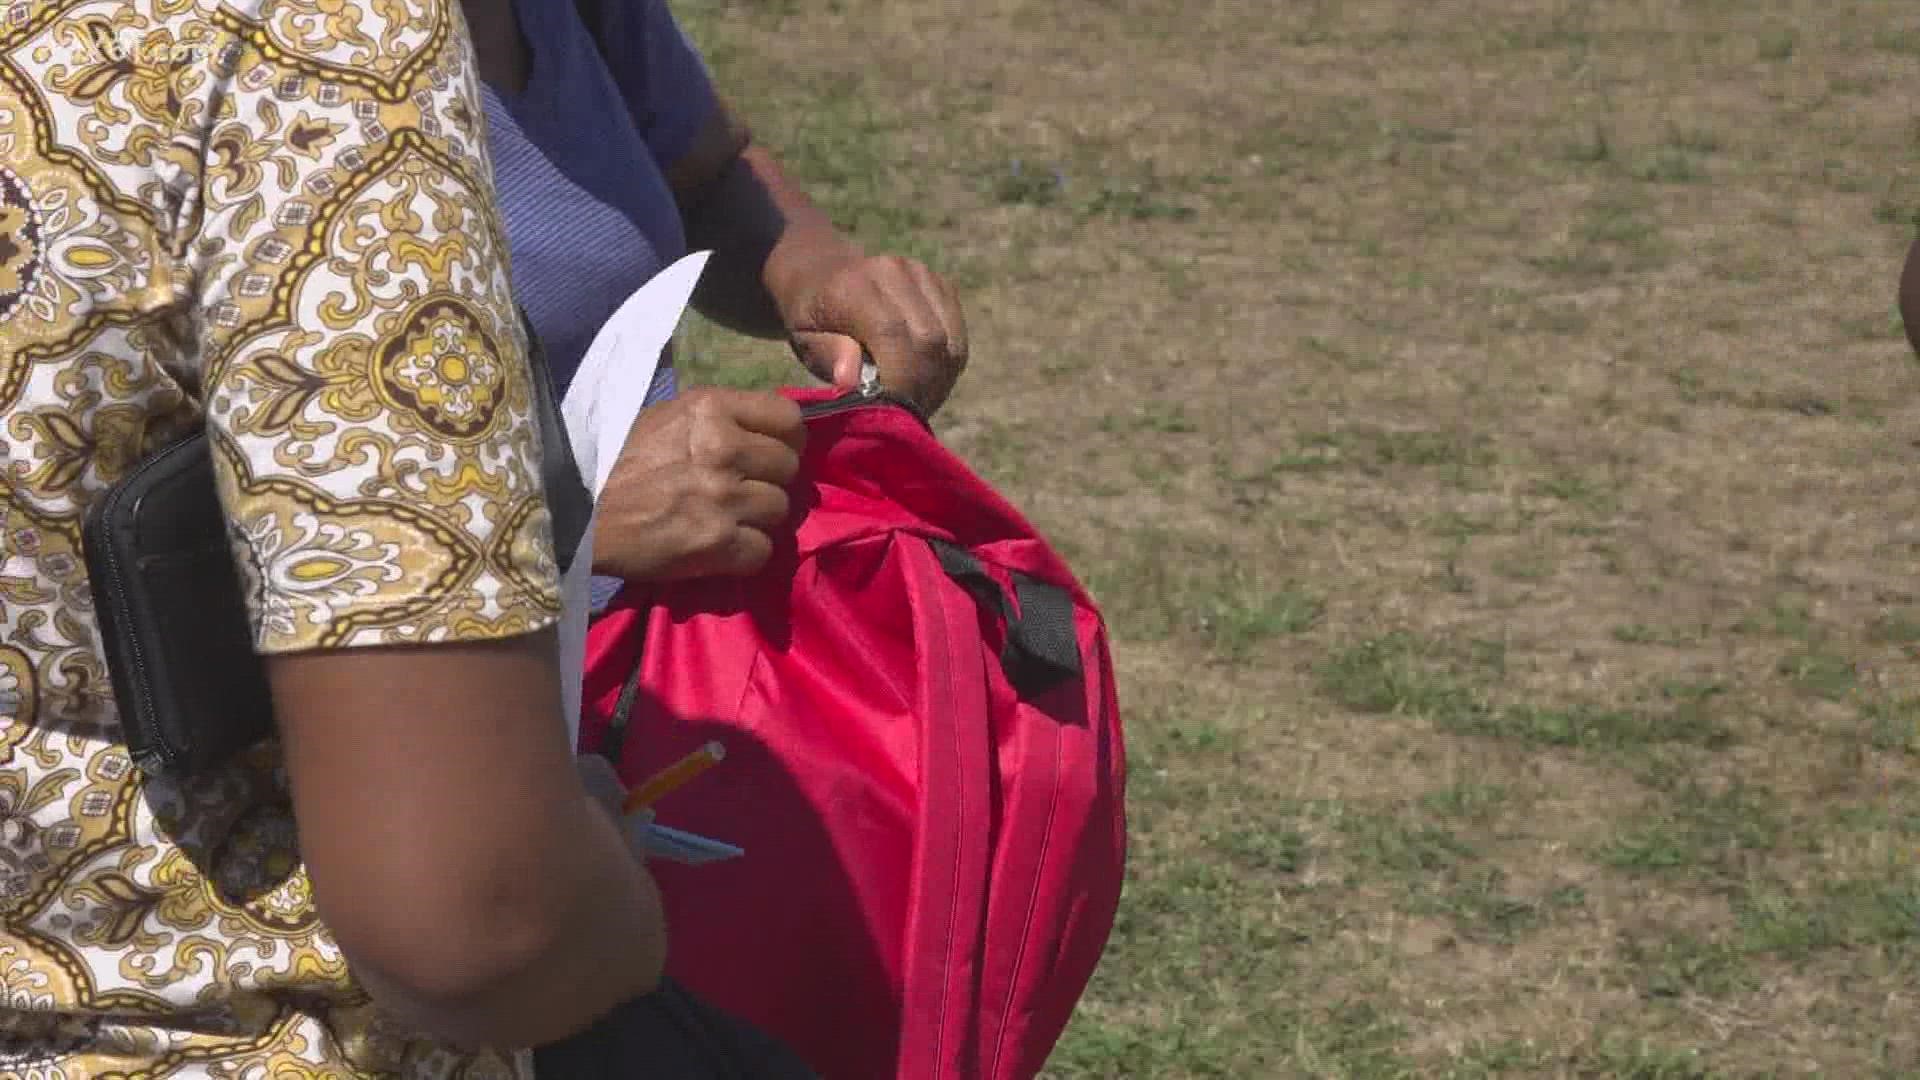 Mental health experts say students going back to school prepared can help students.